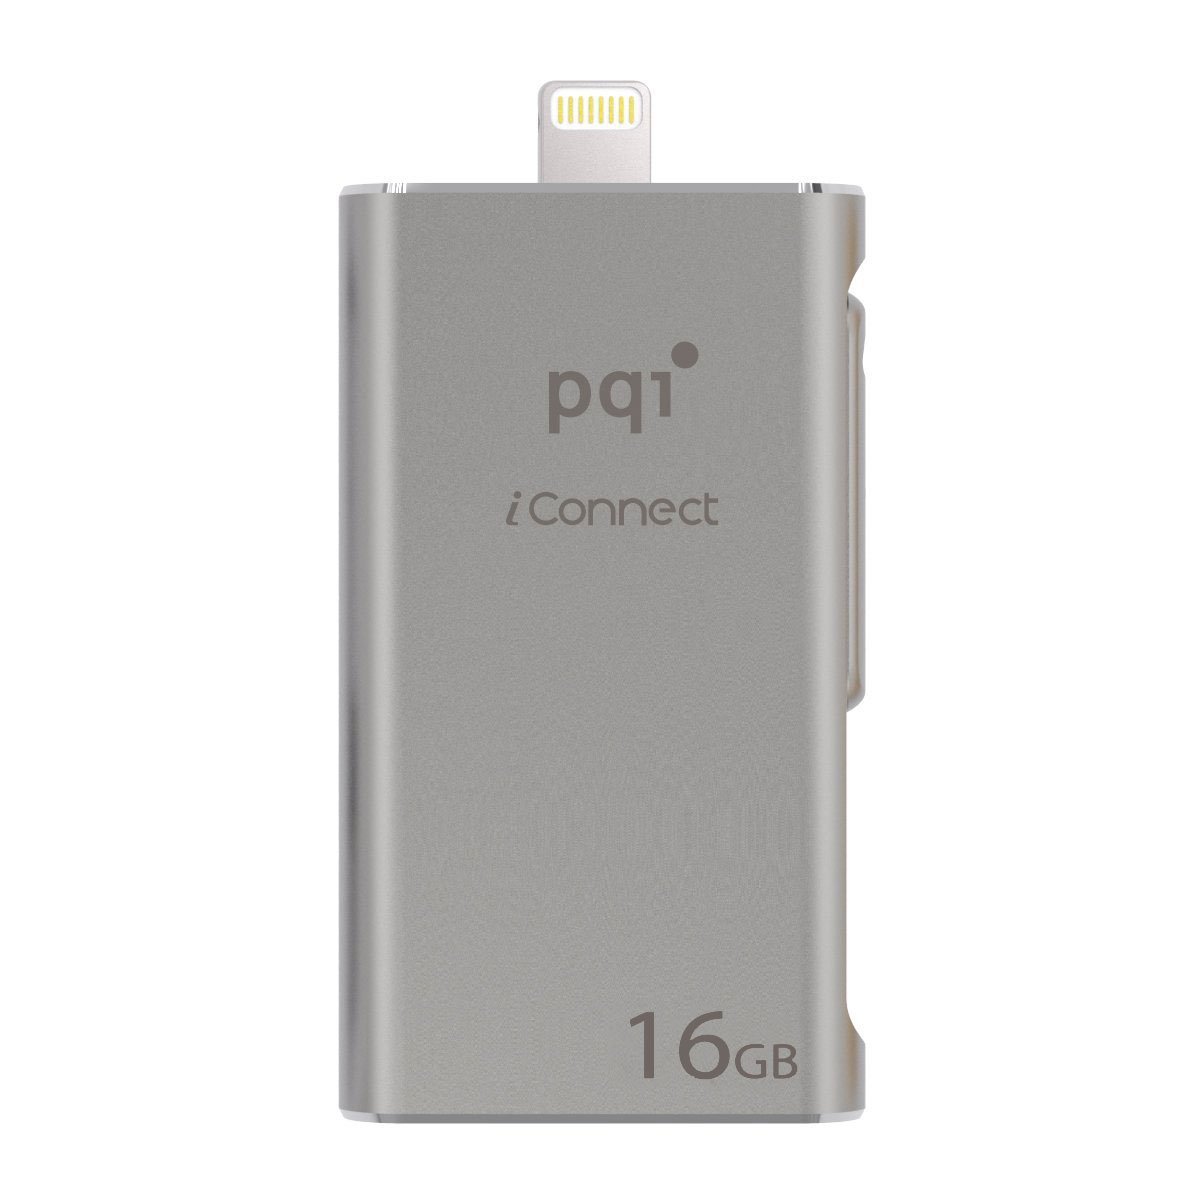 Picture of PQI 6I01-016GR2001 iConnect Apple MFi 16 GB Mobile Flash Drive with Lightning Connector for iPhones, iPads, iPod, Mac & PC USB 3.0 - Iron Gray